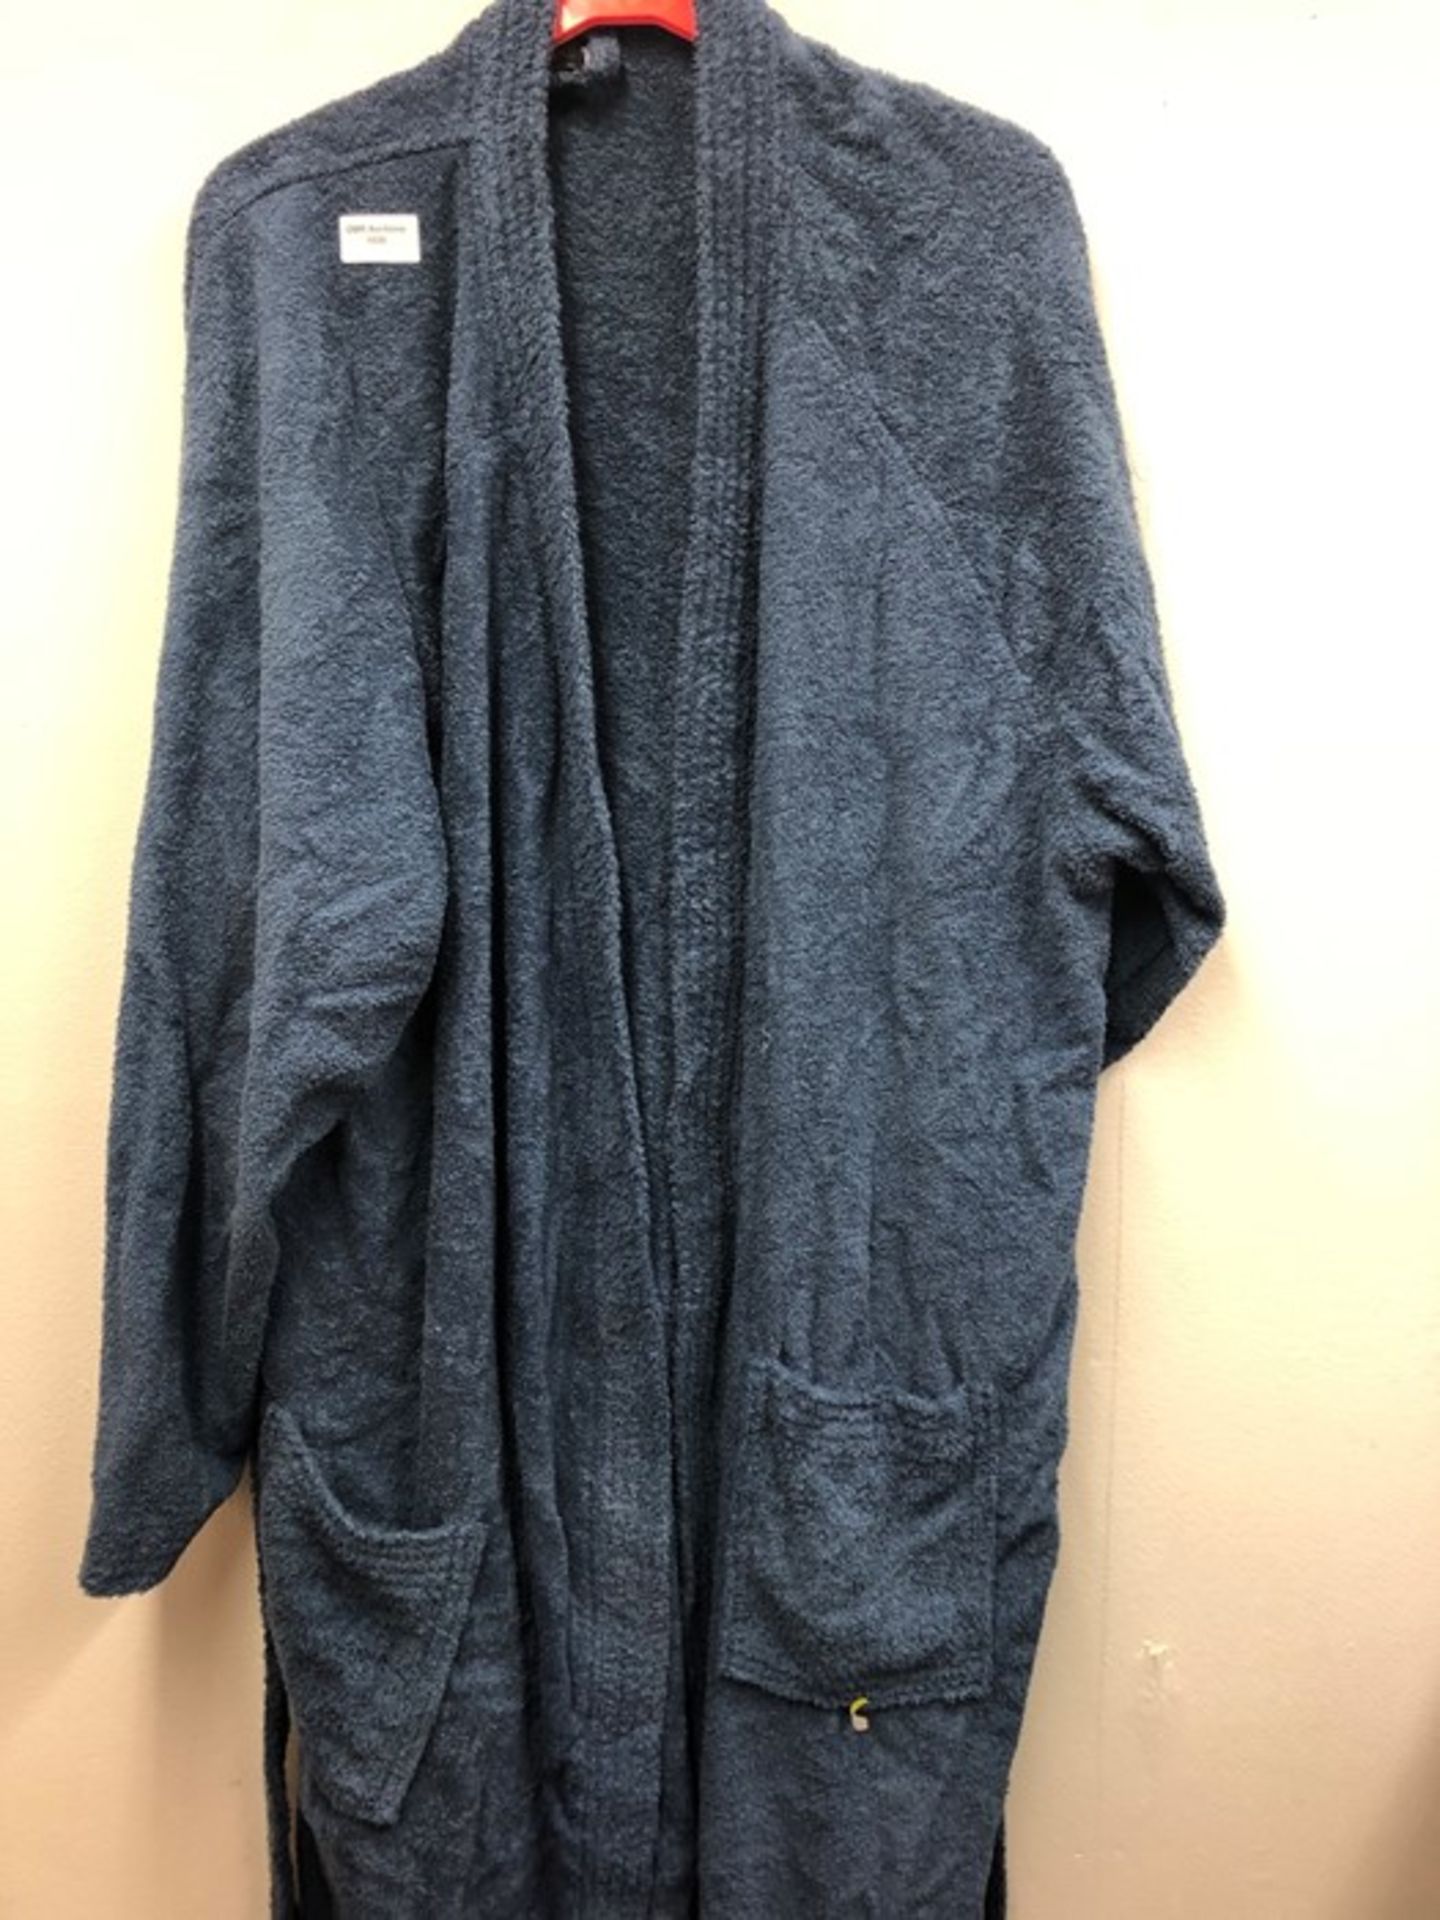 1 LA REDOUTE DRESSING GOWN IN BLUE / SIZE 34/36 (V